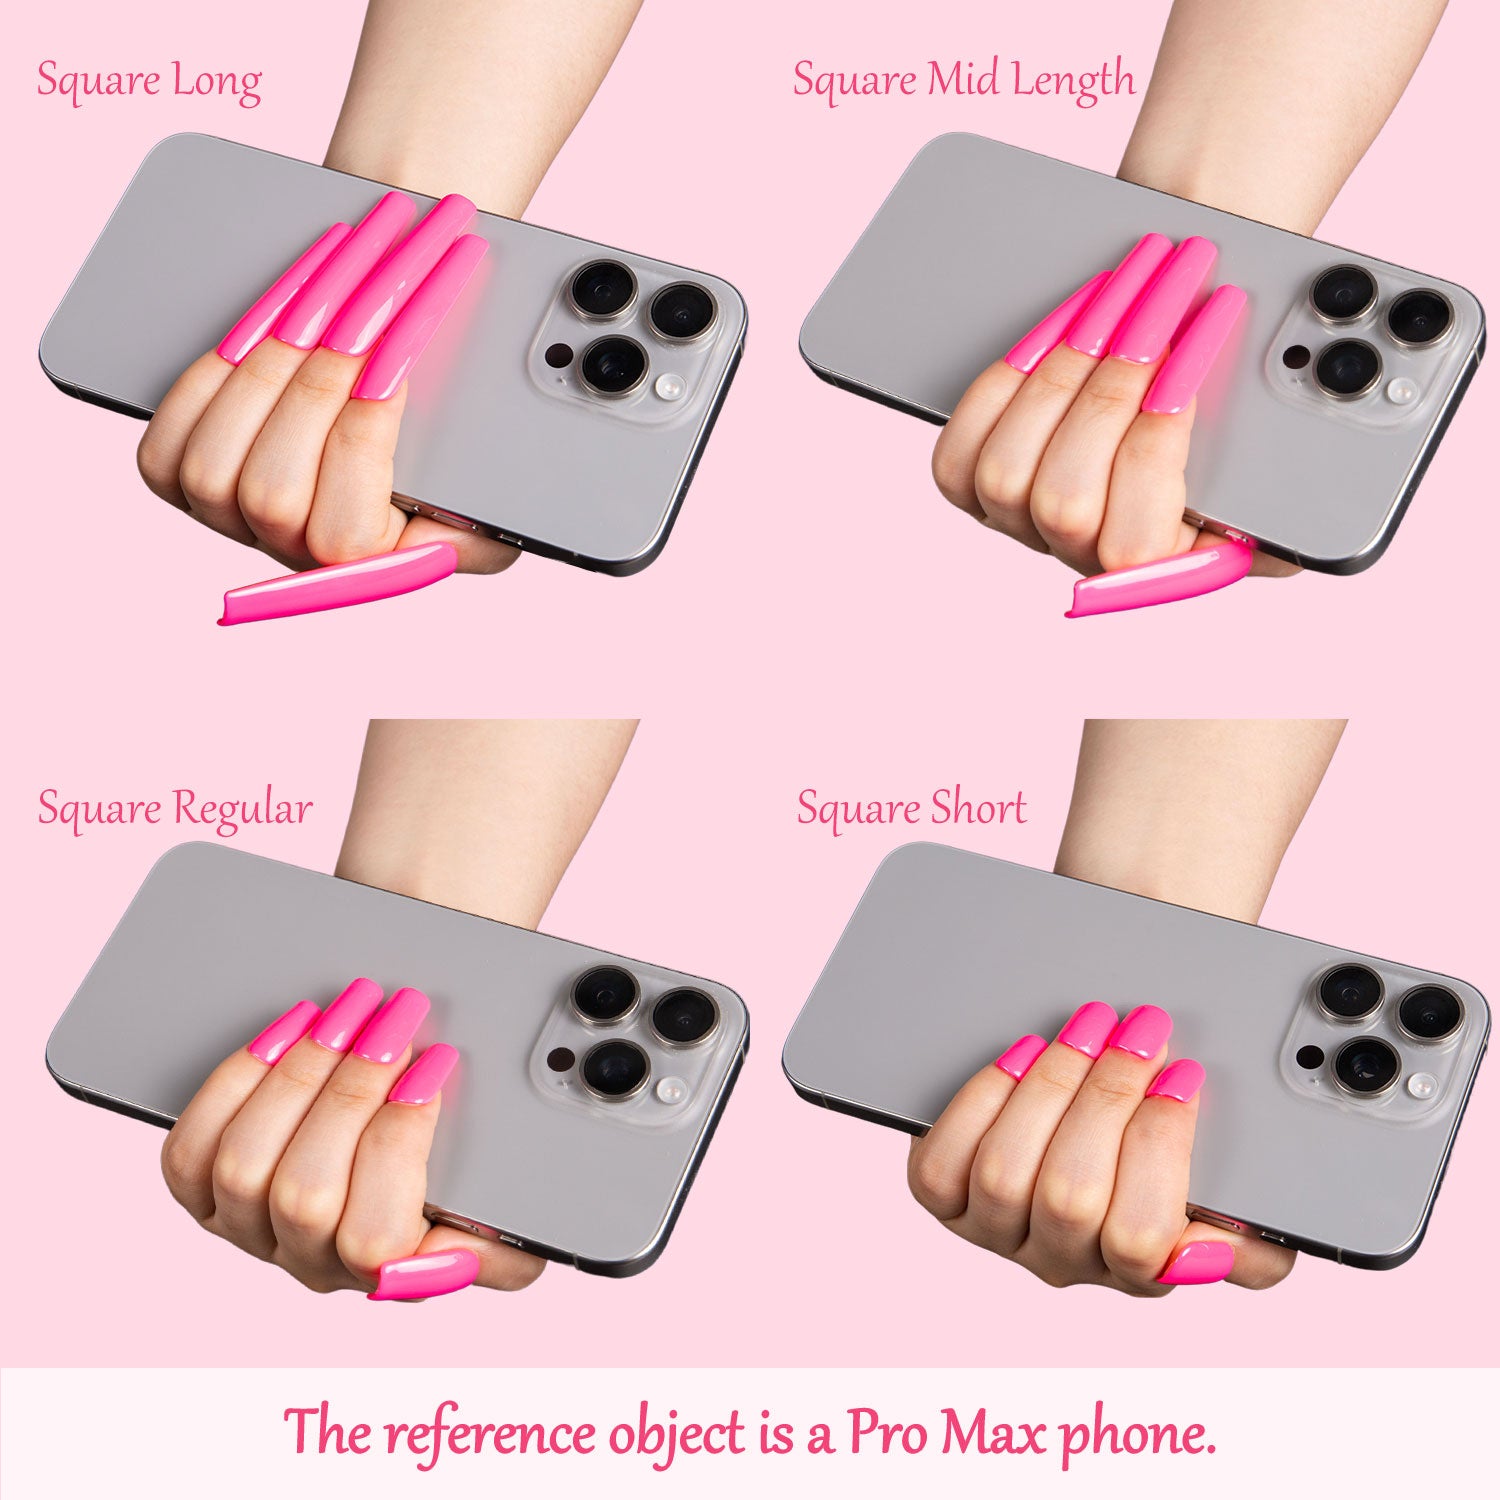 Comparison of four lengths of pink square-shaped press-on nails holding a Pro Max phone: Square Long, Square Mid Length, Square Regular, Square Short. The reference object is a Pro Max phone.